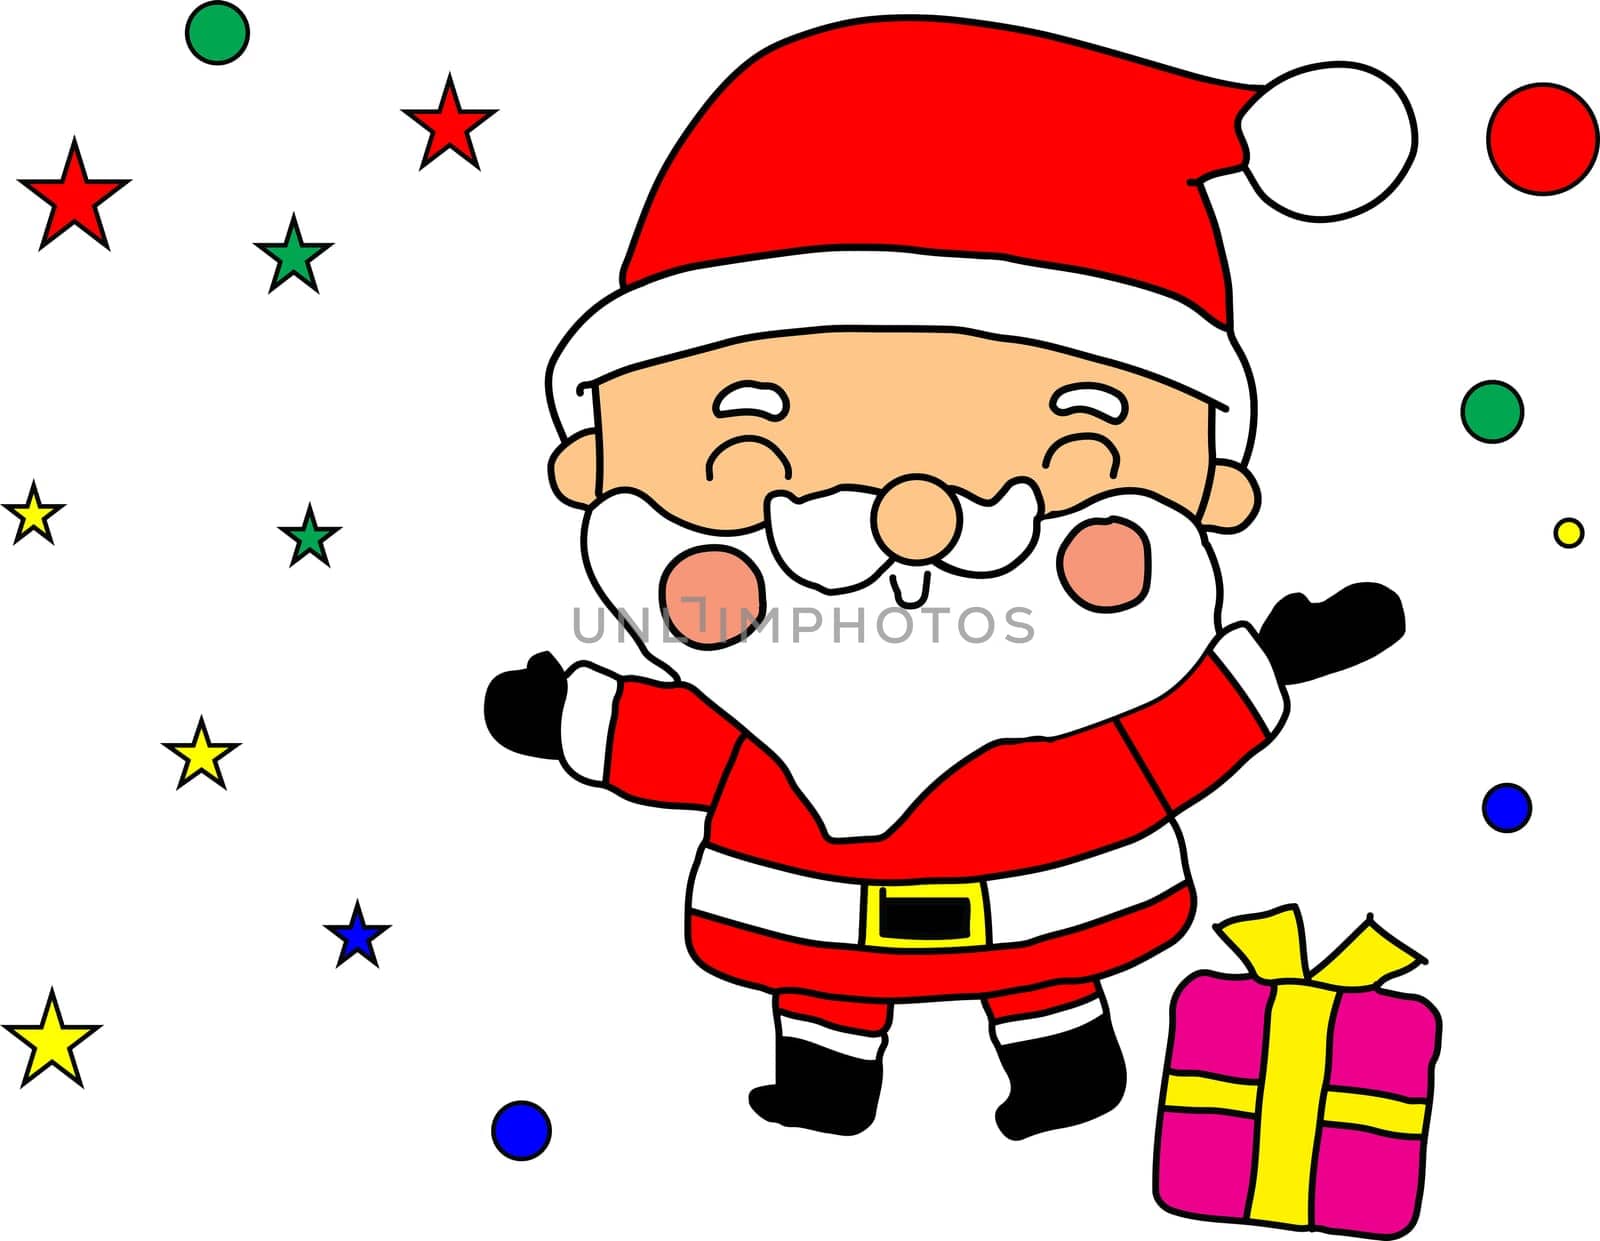 Cartoon Santa Claus holding a present, smiling and giving a thumbs up. Christmas design